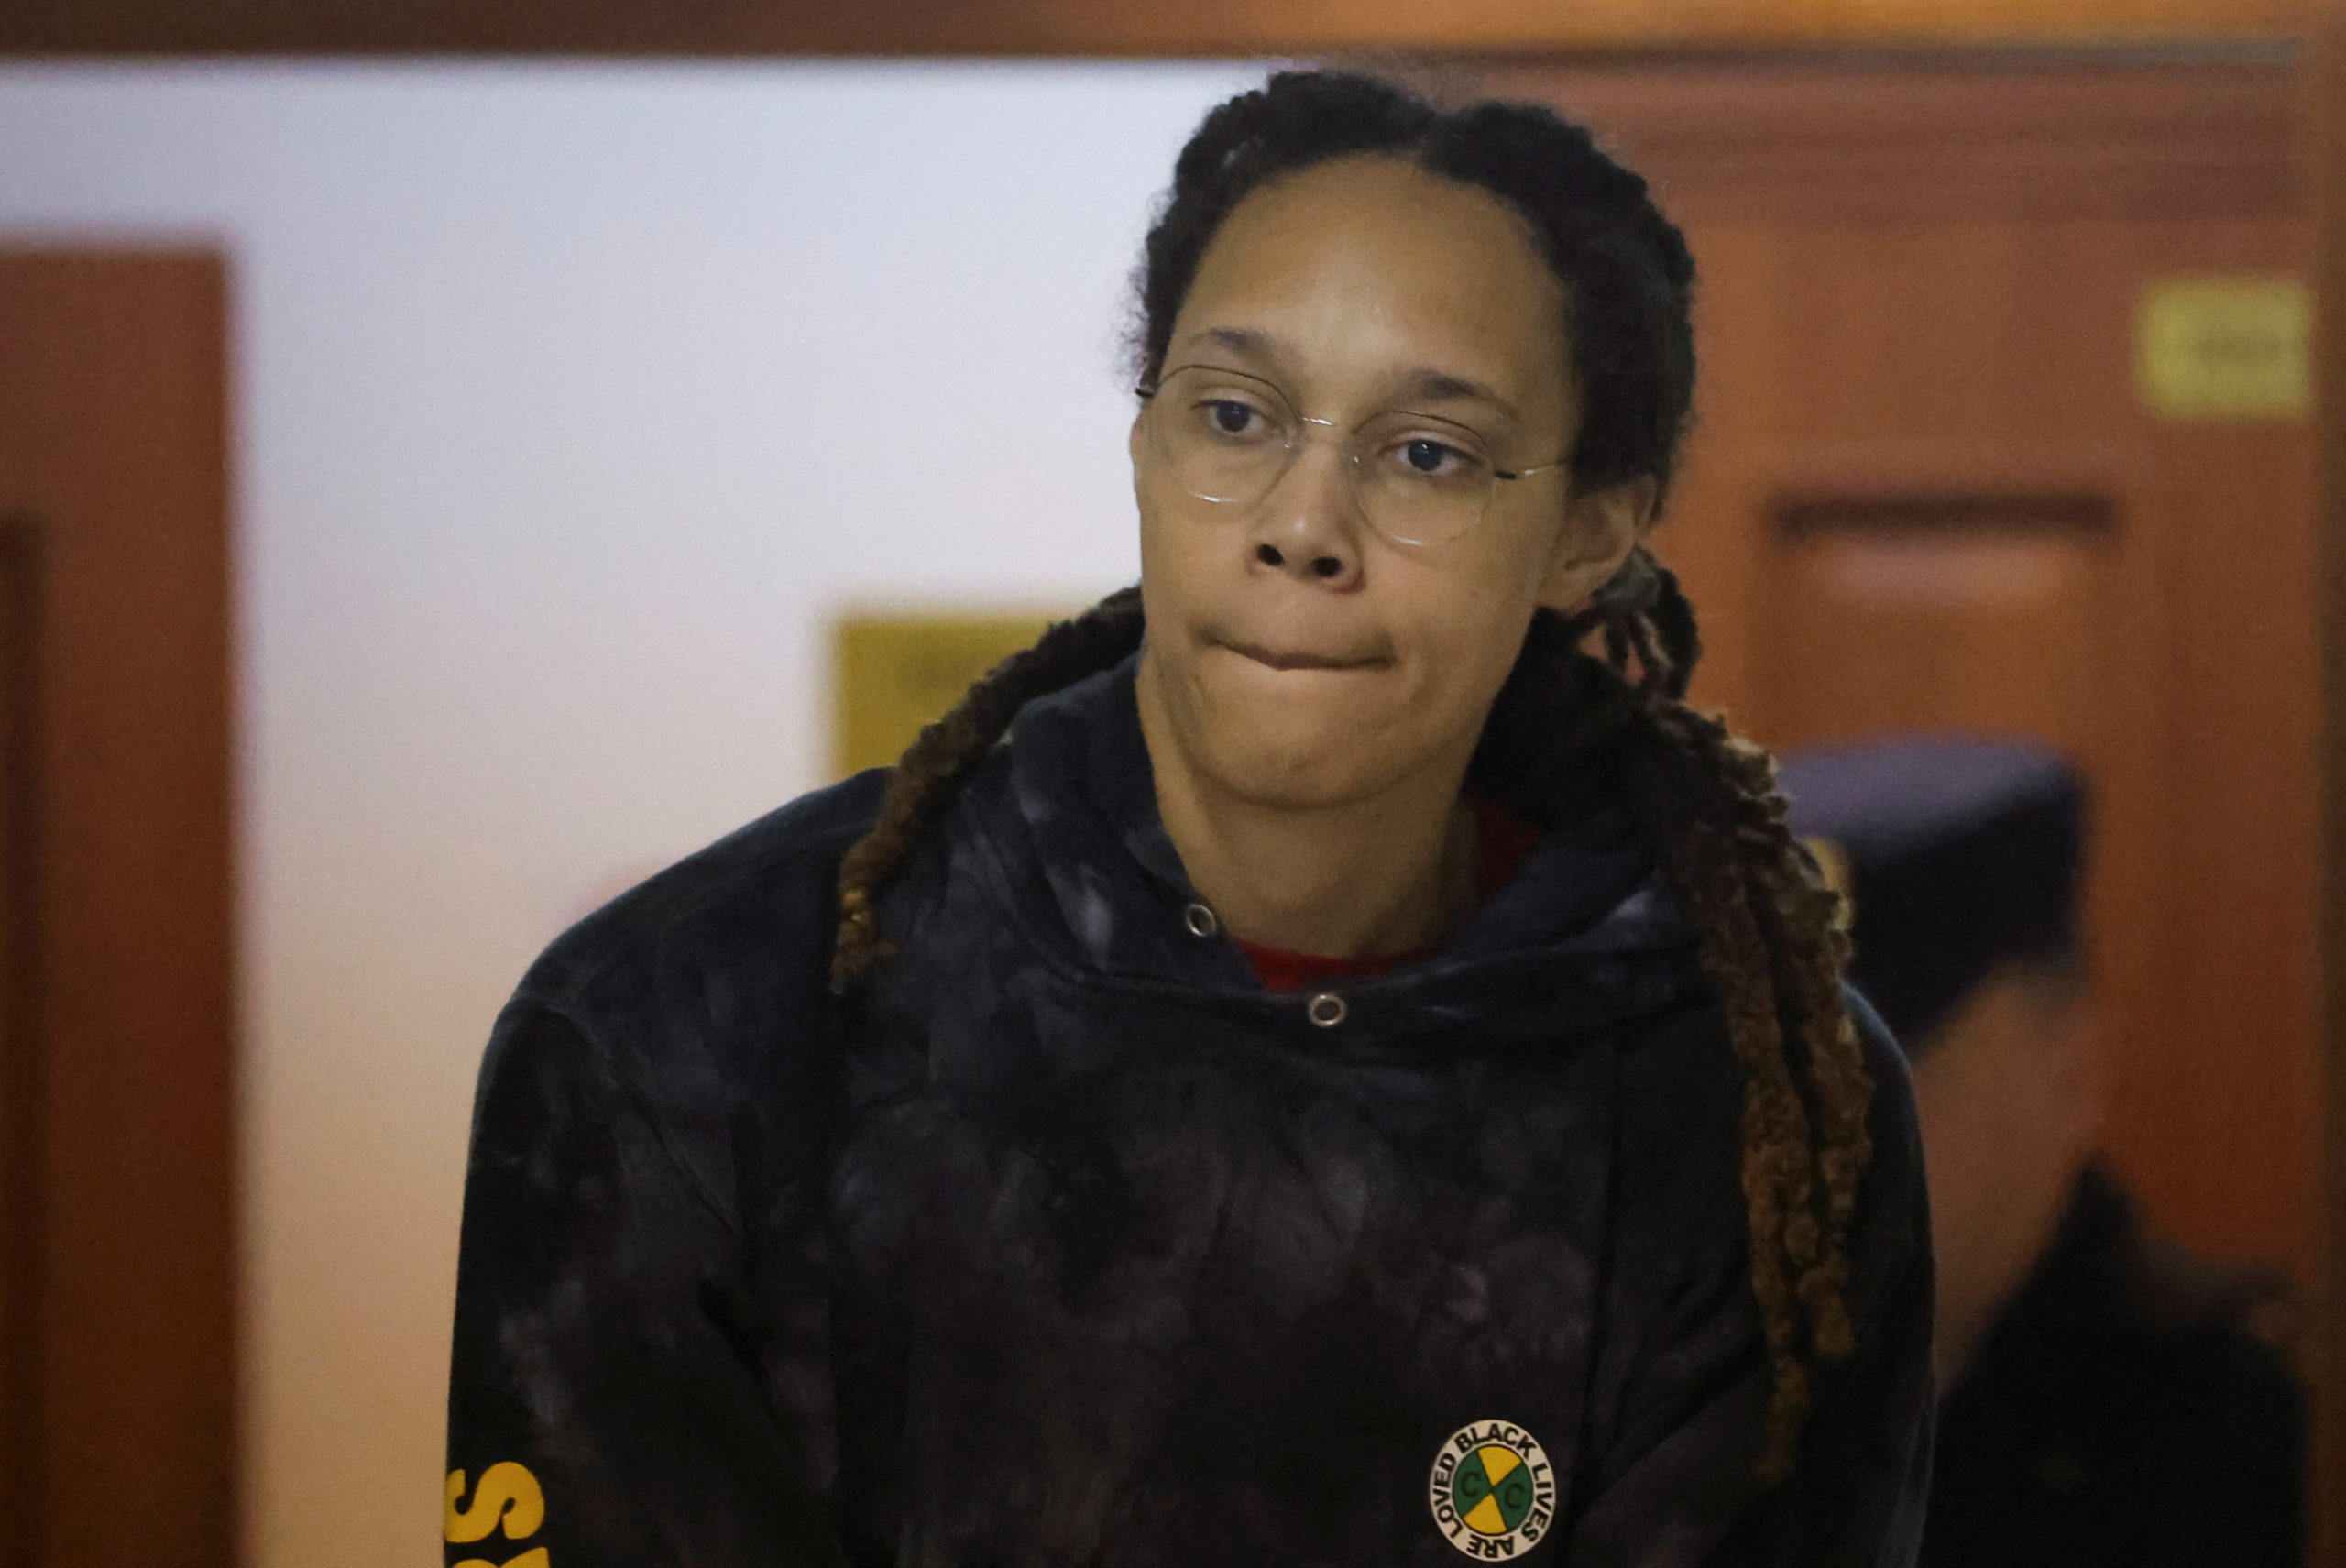 U.S. basketball player Brittney Griner, who was detained at Moscow's Sheremetyevo airport and later charged with illegal possession of cannabis, is escorted before a court hearing in Khimki outside Moscow, Russia July 26, 2022.